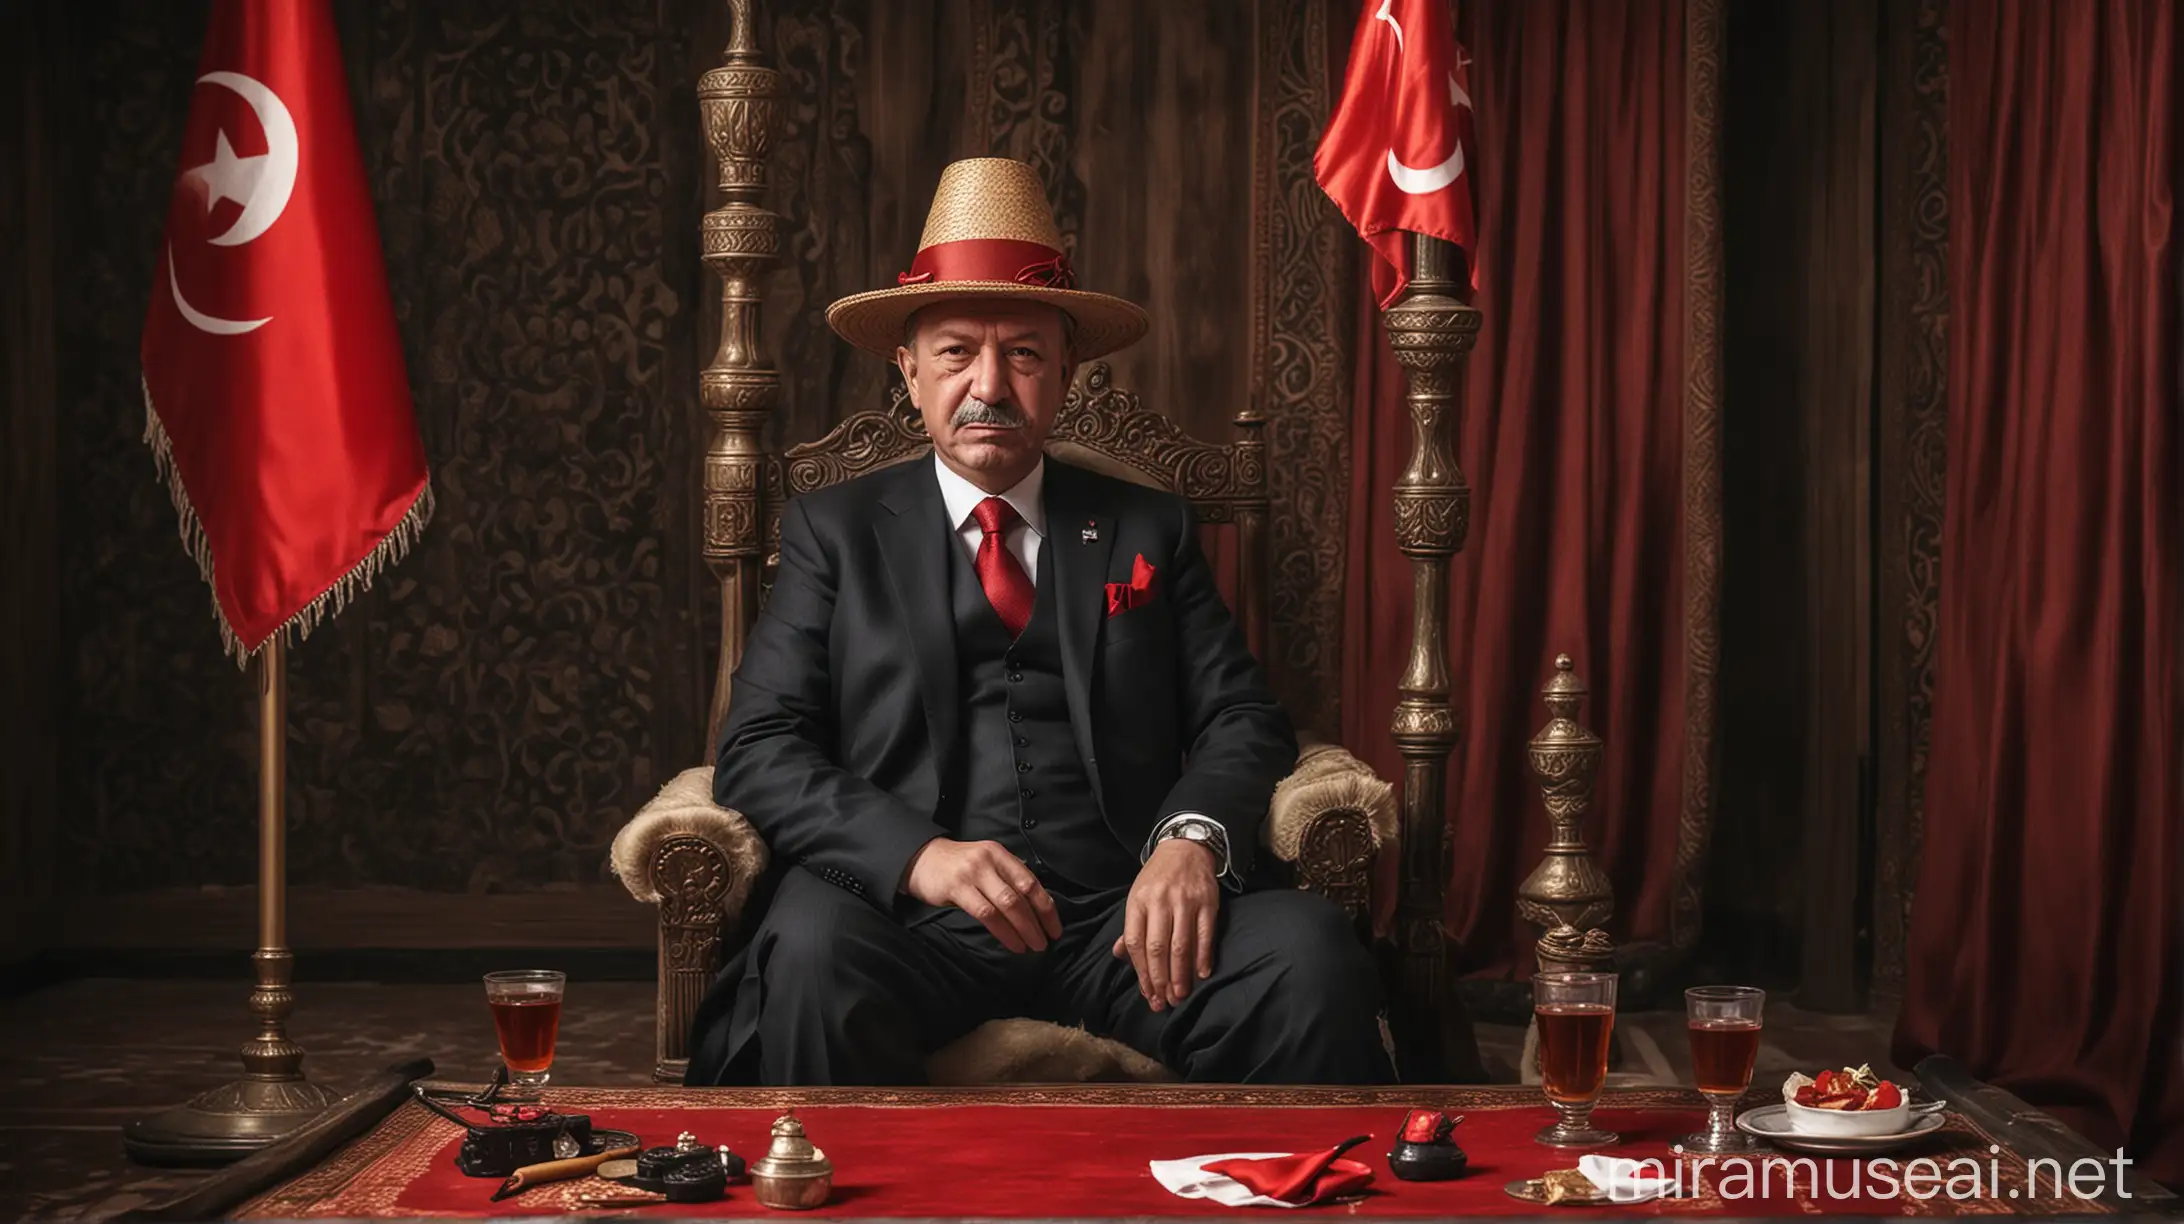 The Turkish president is sitting in a shisha bar wearing a straw hat with a red band on his head. The Turkish flag is in the background, and on the table, there is Turkish tea. He is sitting on a throne. The image is intended to evoke funny emotions.